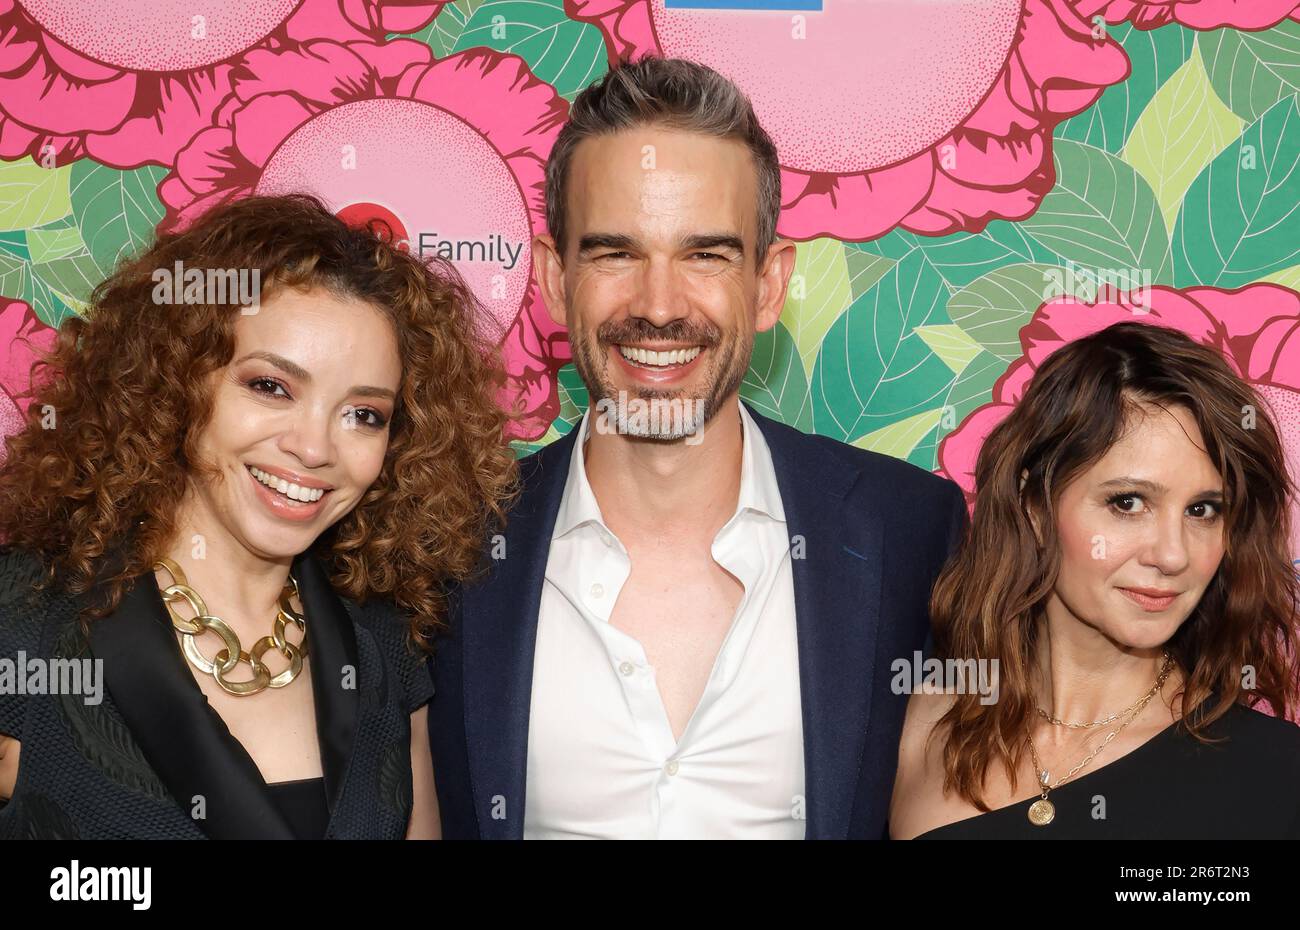 Hollywood, Ca. 10th June, 2023. Anel López Gorham, Chris Gorham, Tamara Mello at the Stand for Kids Gala supporting The Luskin Orthopaedic Institute for Children at Universal Studios Backlot in Hollywood, California on June 10, 2023. Credit: Faye Sadou/Media Punch/Alamy Live News Stock Photo